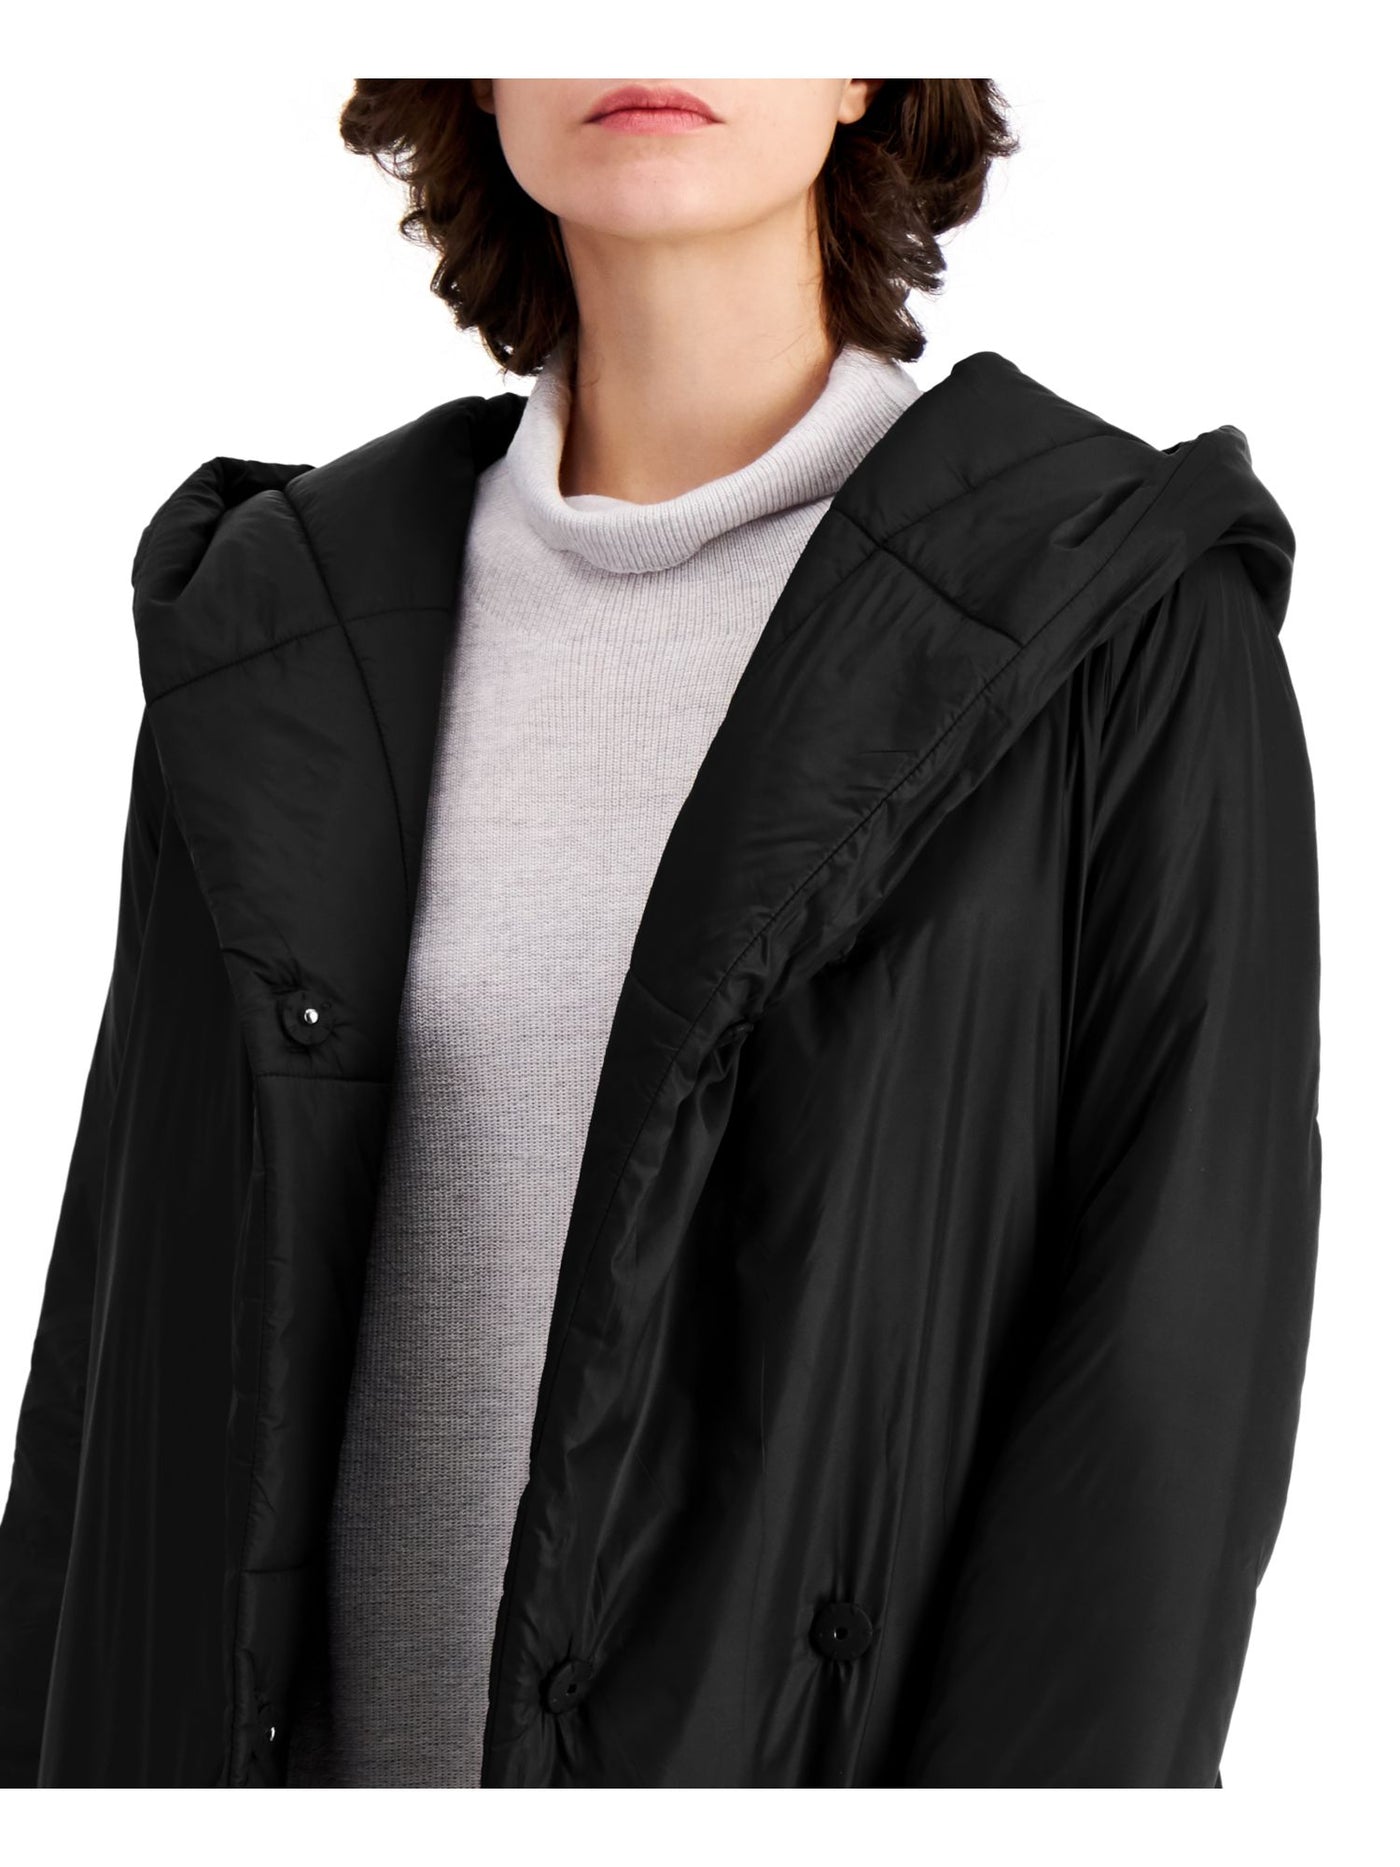 EILEEN FISHER Womens Black Pocketed Hooded Winter Jacket Coat XL